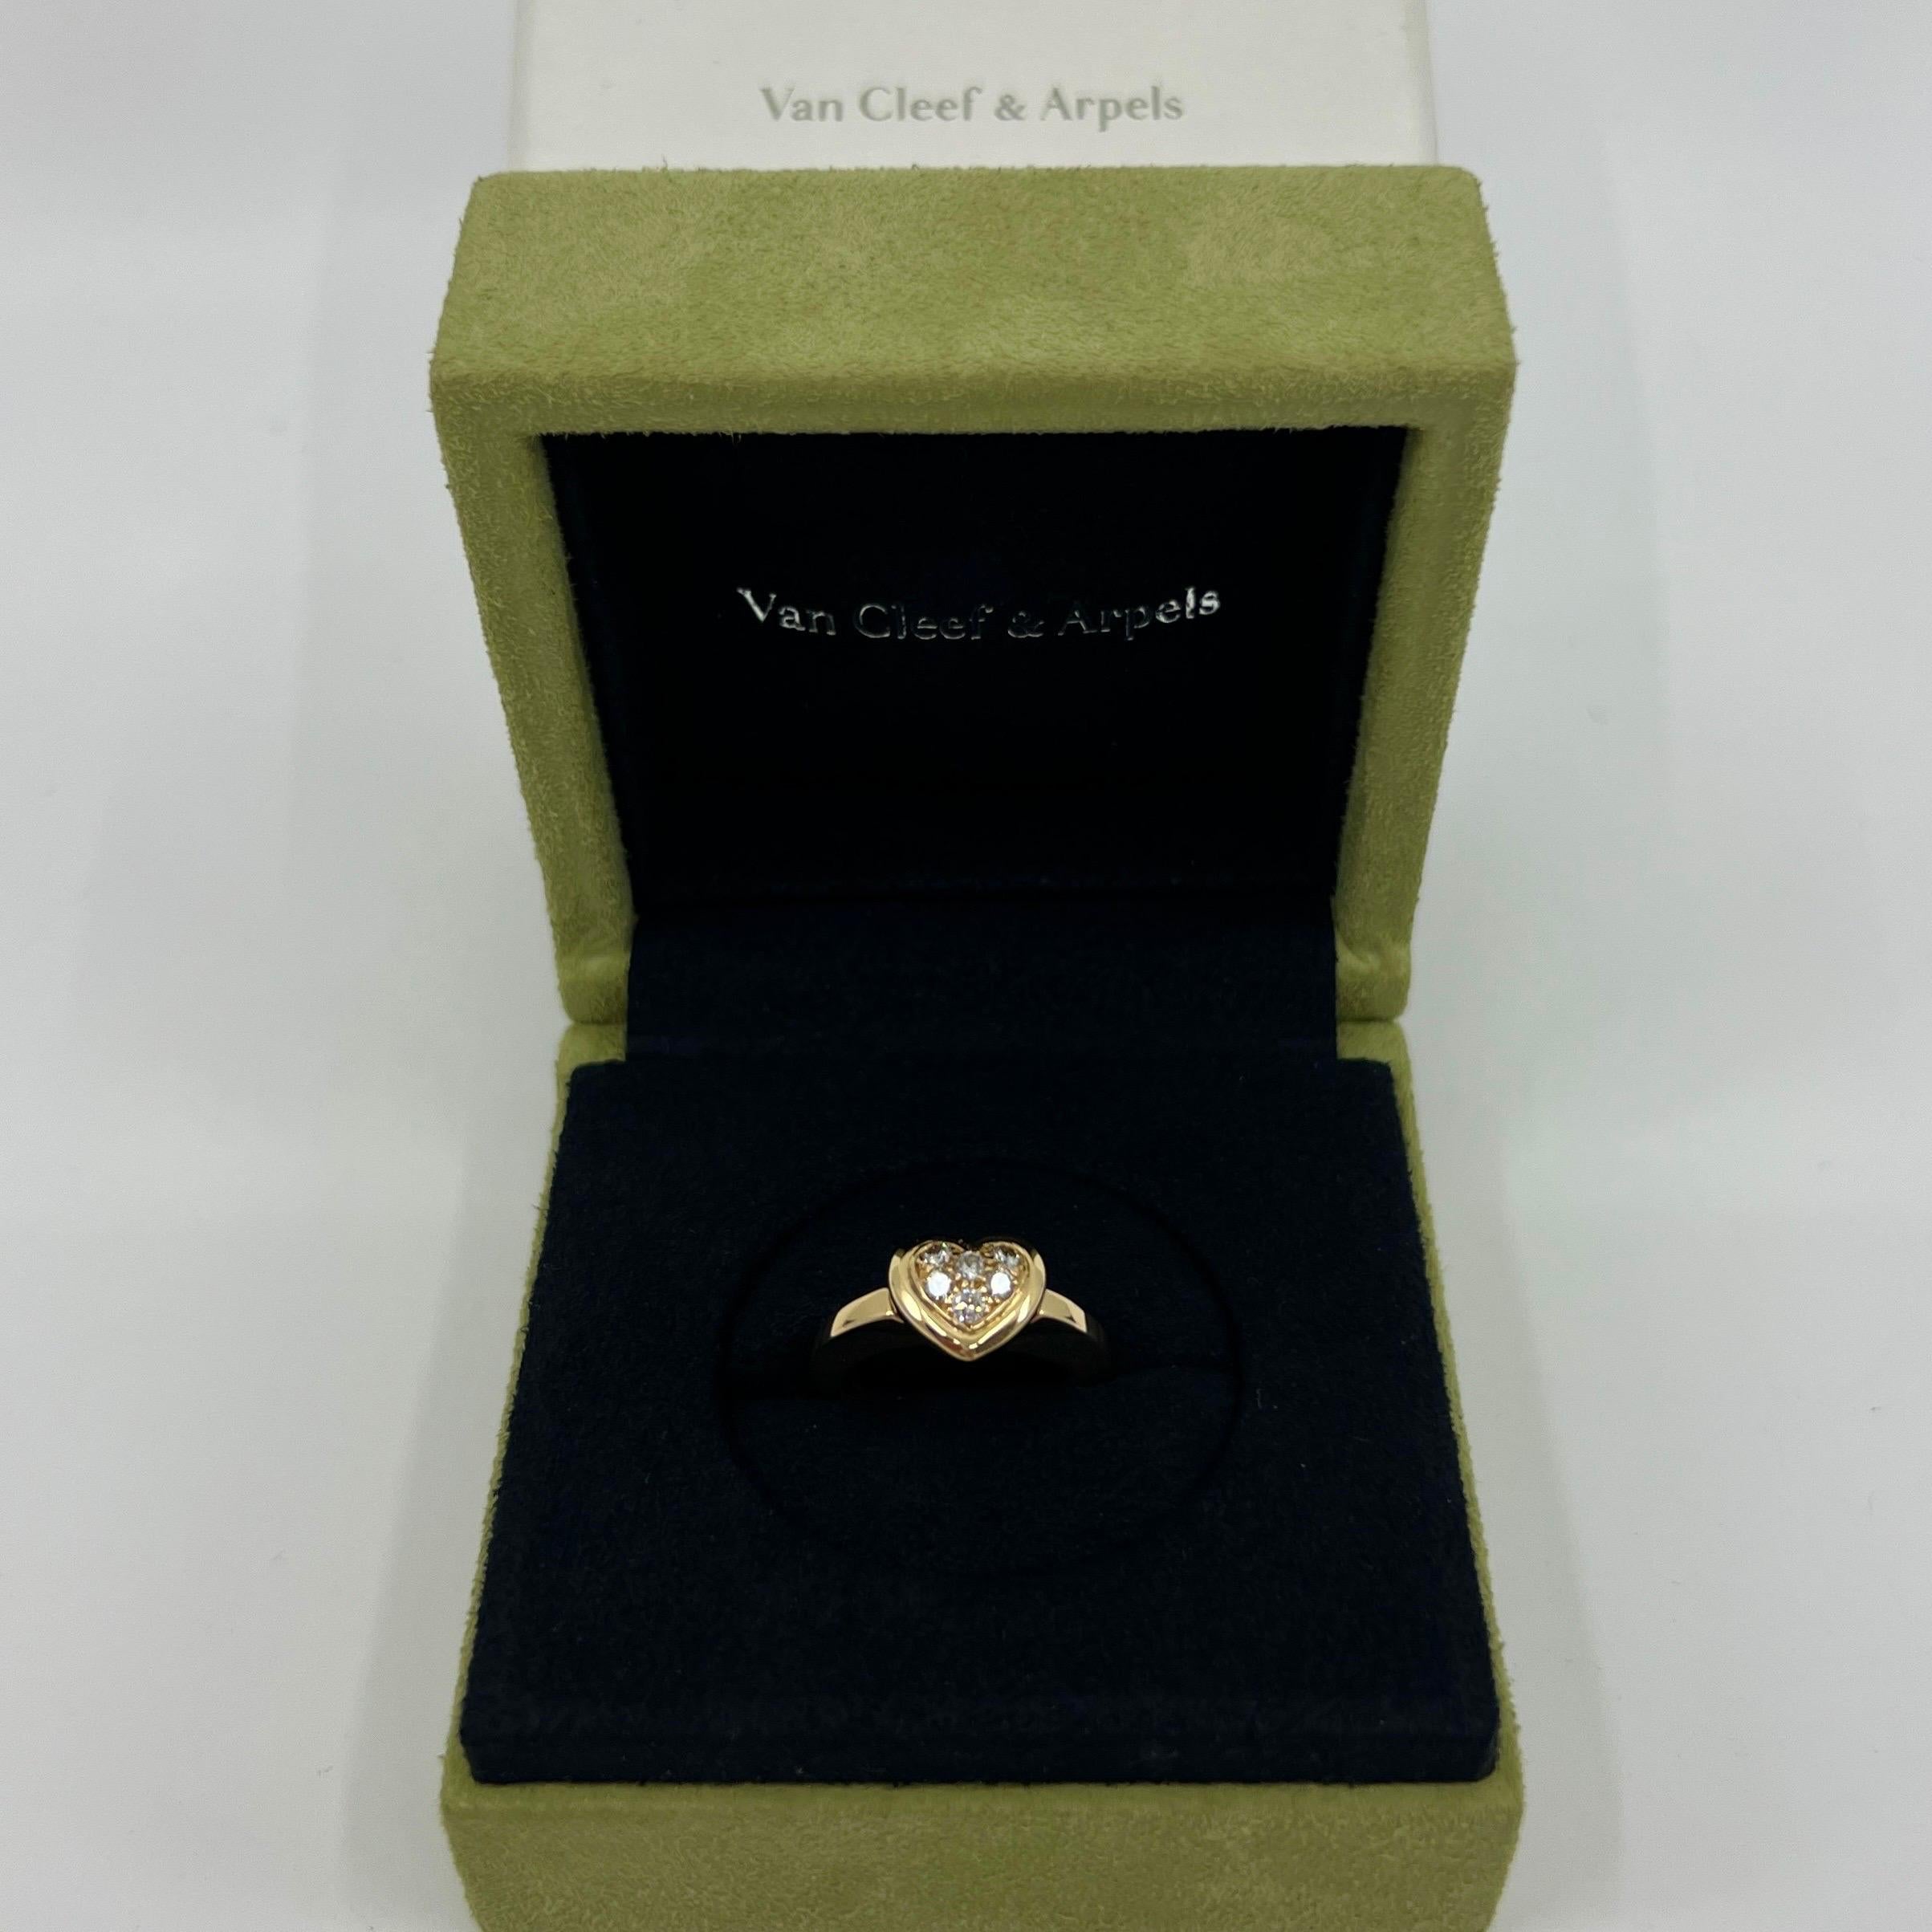 Round Cut Rare Vintage Van Cleef & Arpels 18k Yellow Gold Diamond Heart Ring And Pendant For Sale